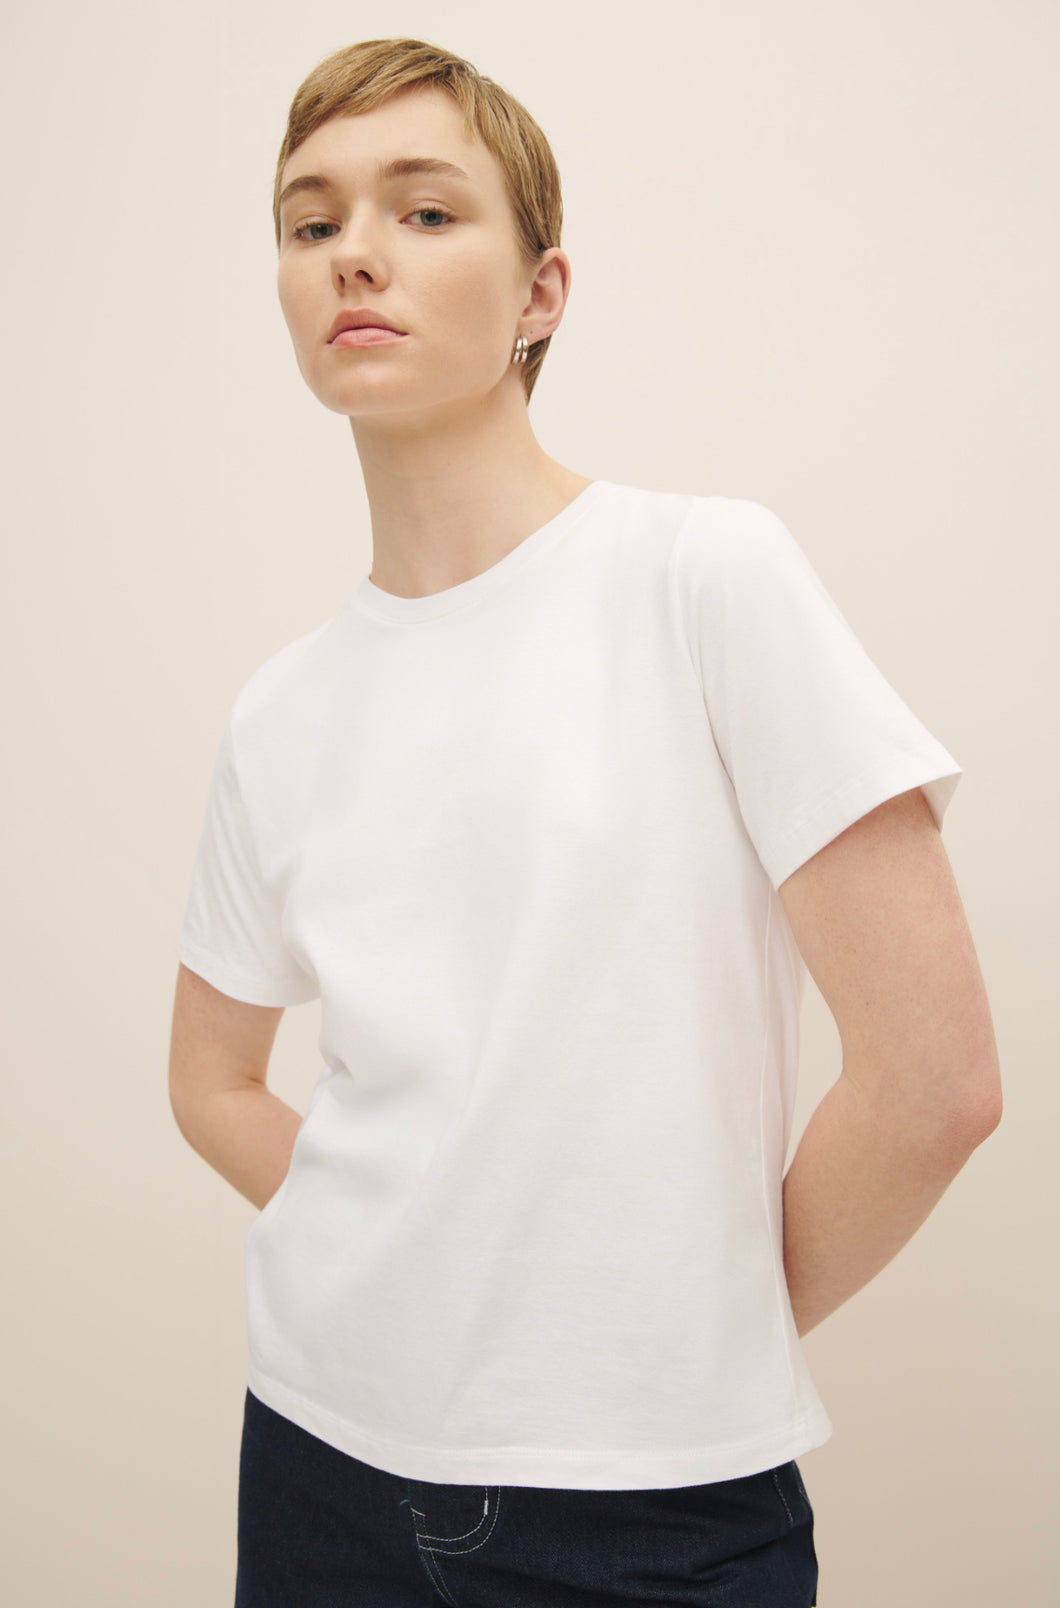 Kowtow Classic Tee - White  Hyde Boutique   